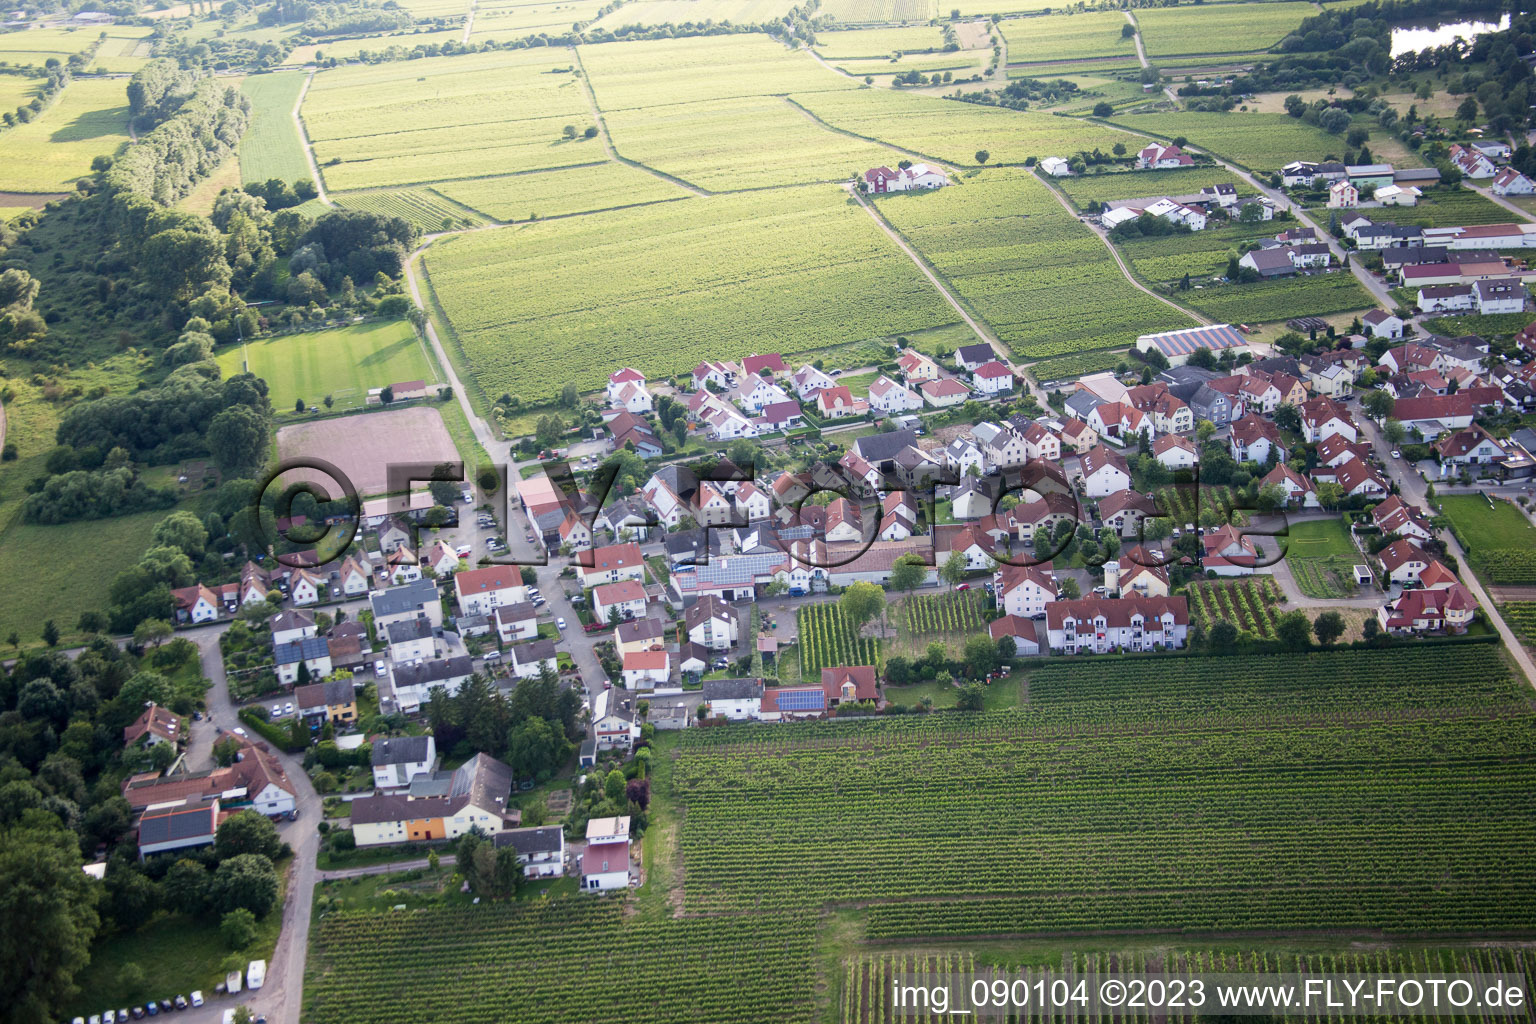 Drone image of Kirrweiler in the state Rhineland-Palatinate, Germany